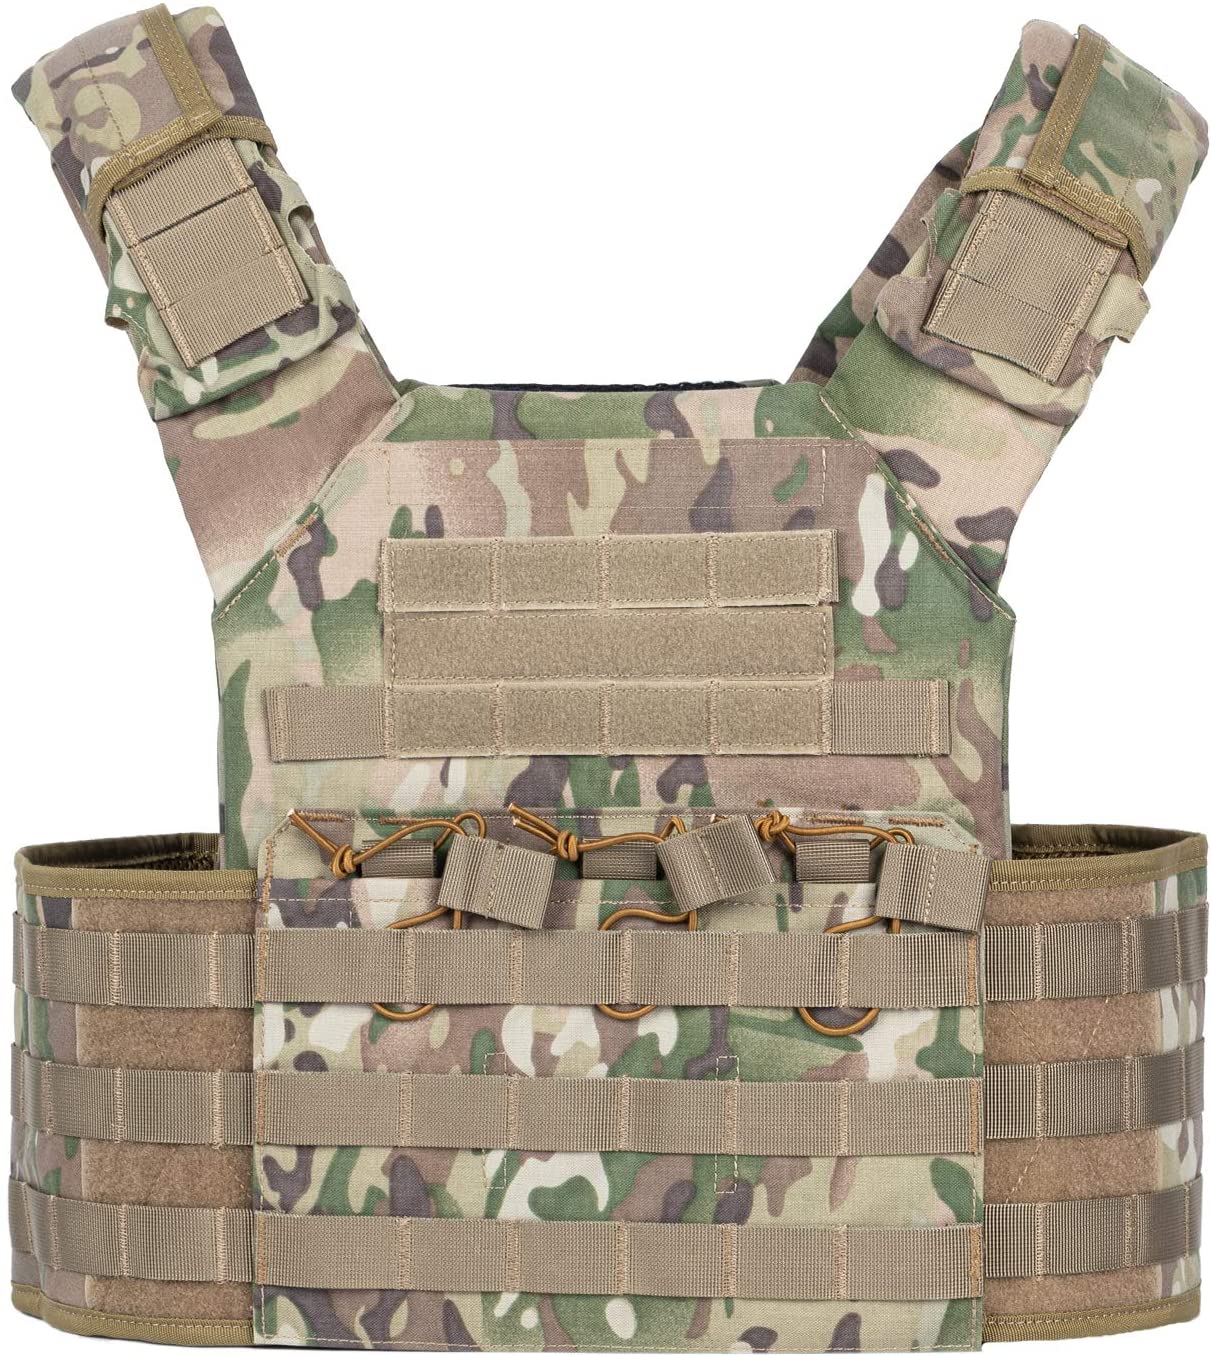 Latest molle gear straps Supply for army-1